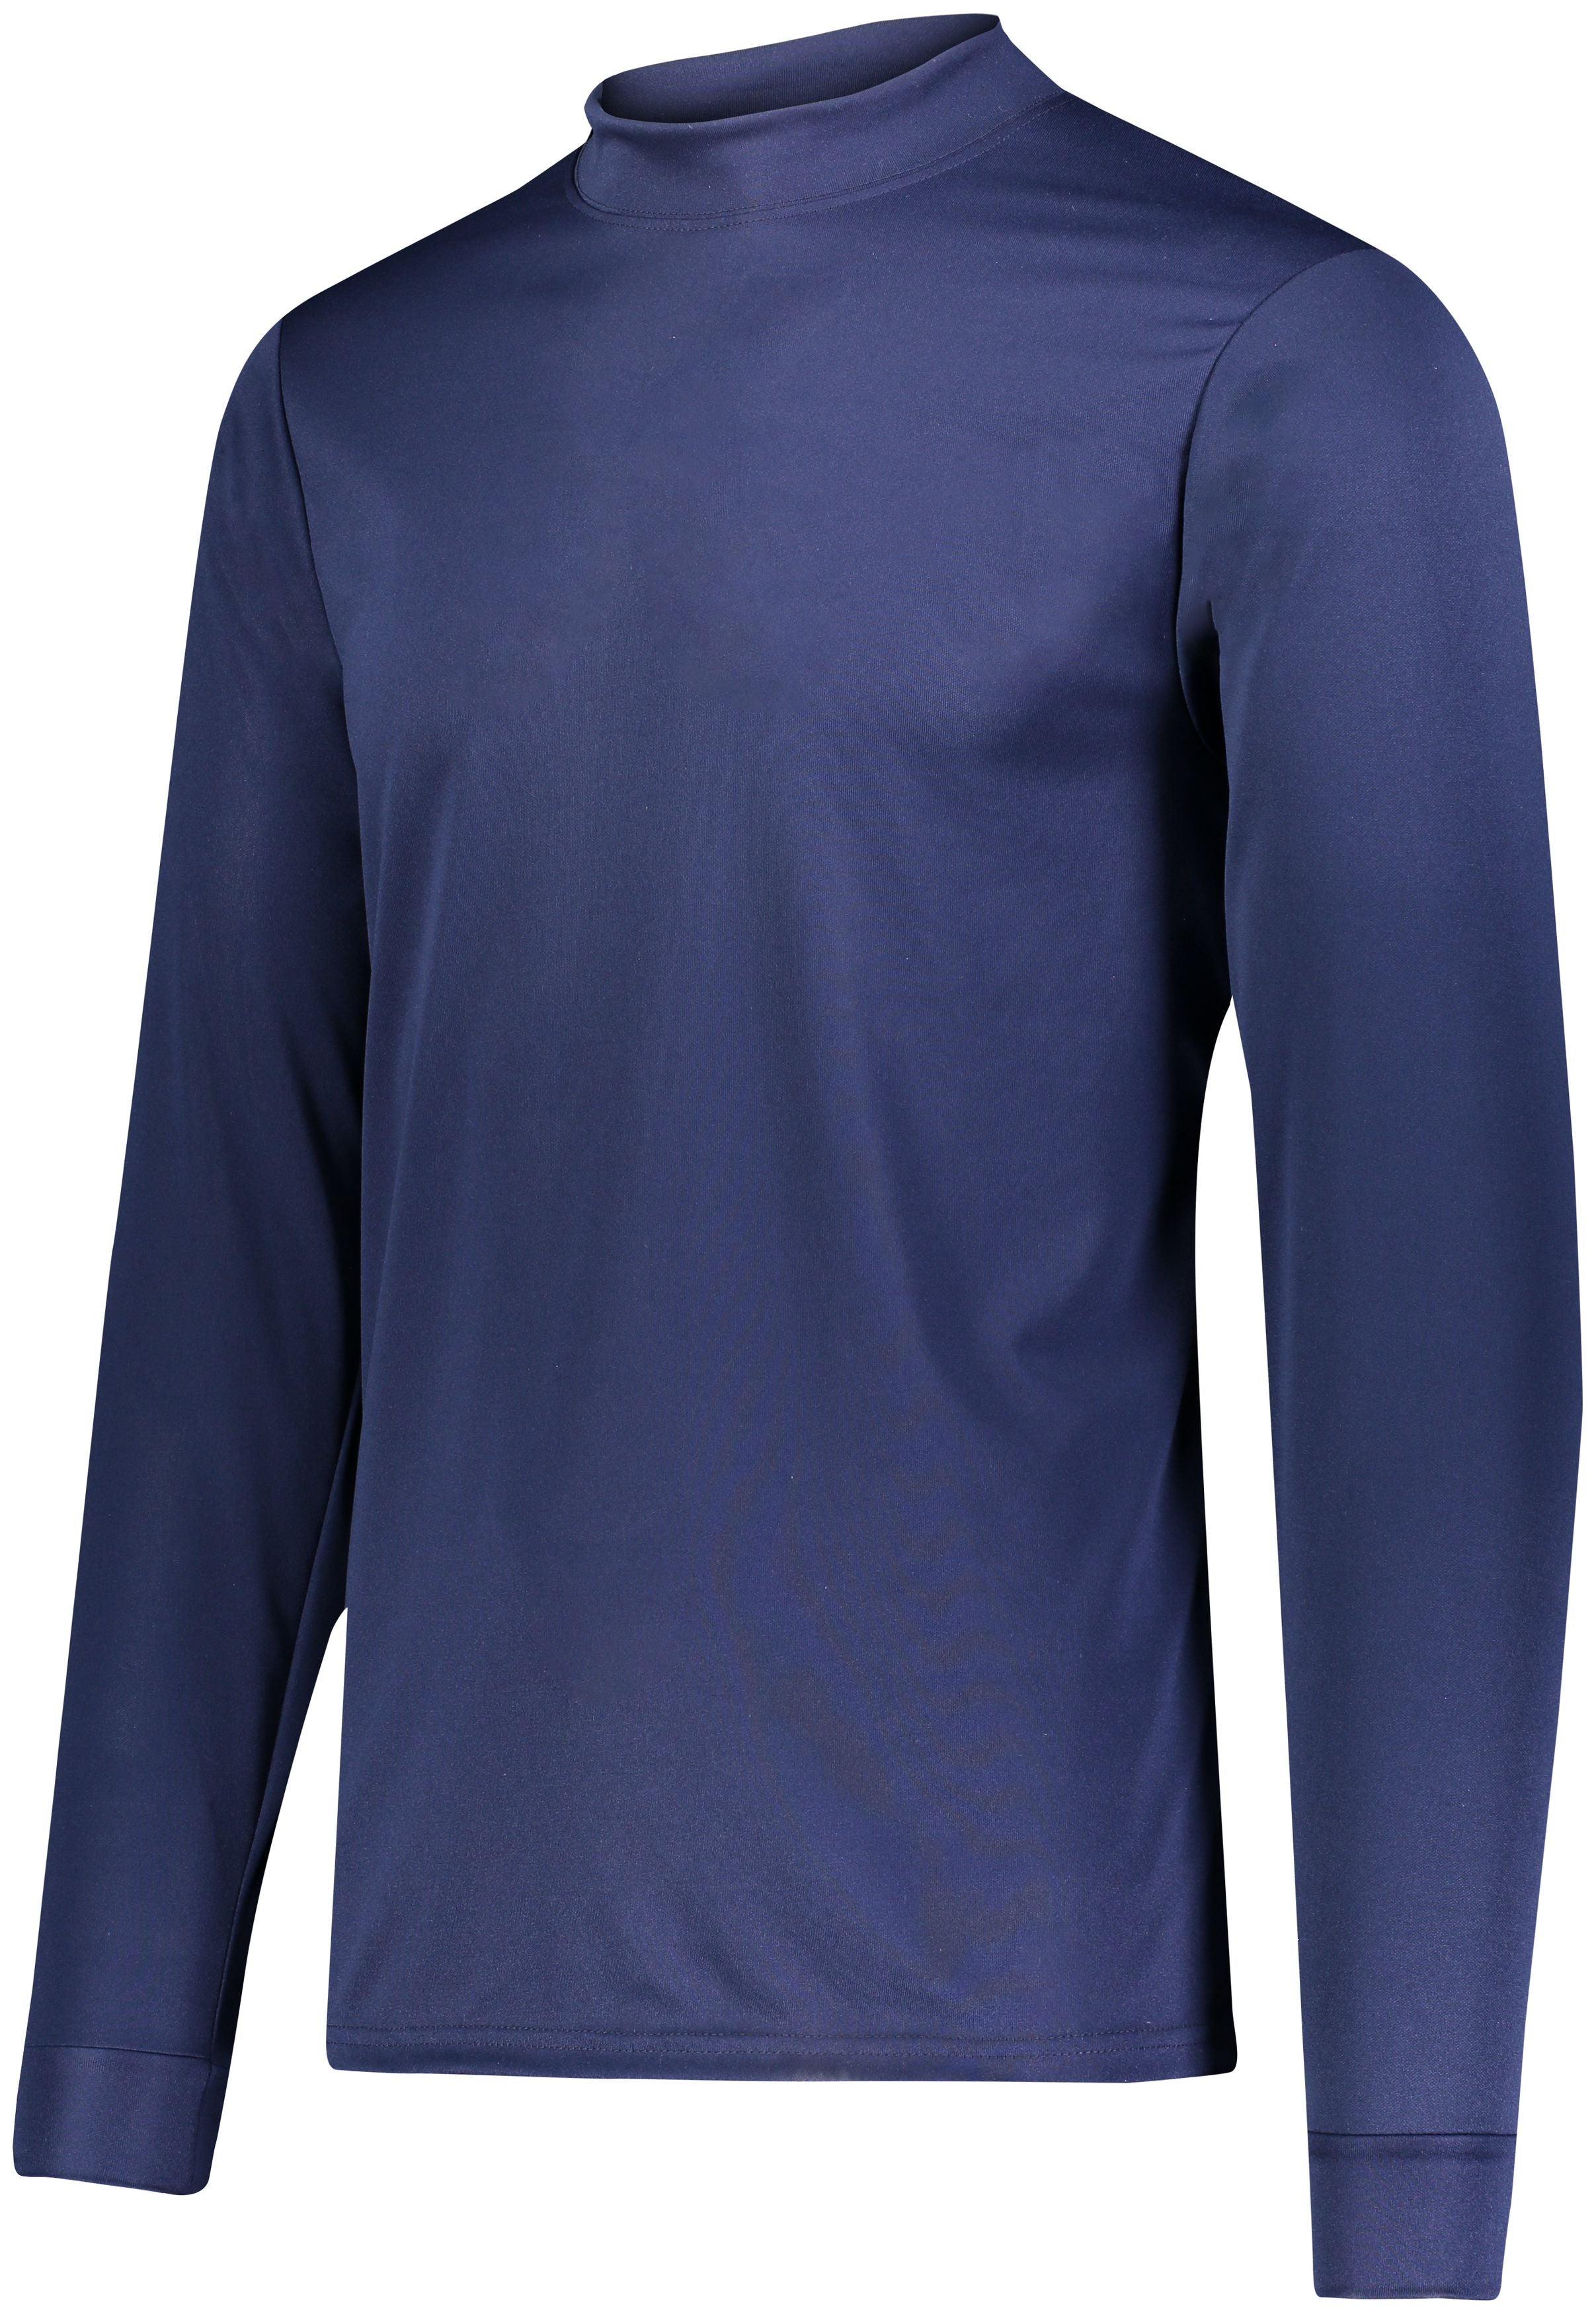 Augusta Sportswear Youth Wicking Mock Turtleneck in Navy  -Part of the Youth, Augusta-Products, Tennis, Shirts product lines at KanaleyCreations.com